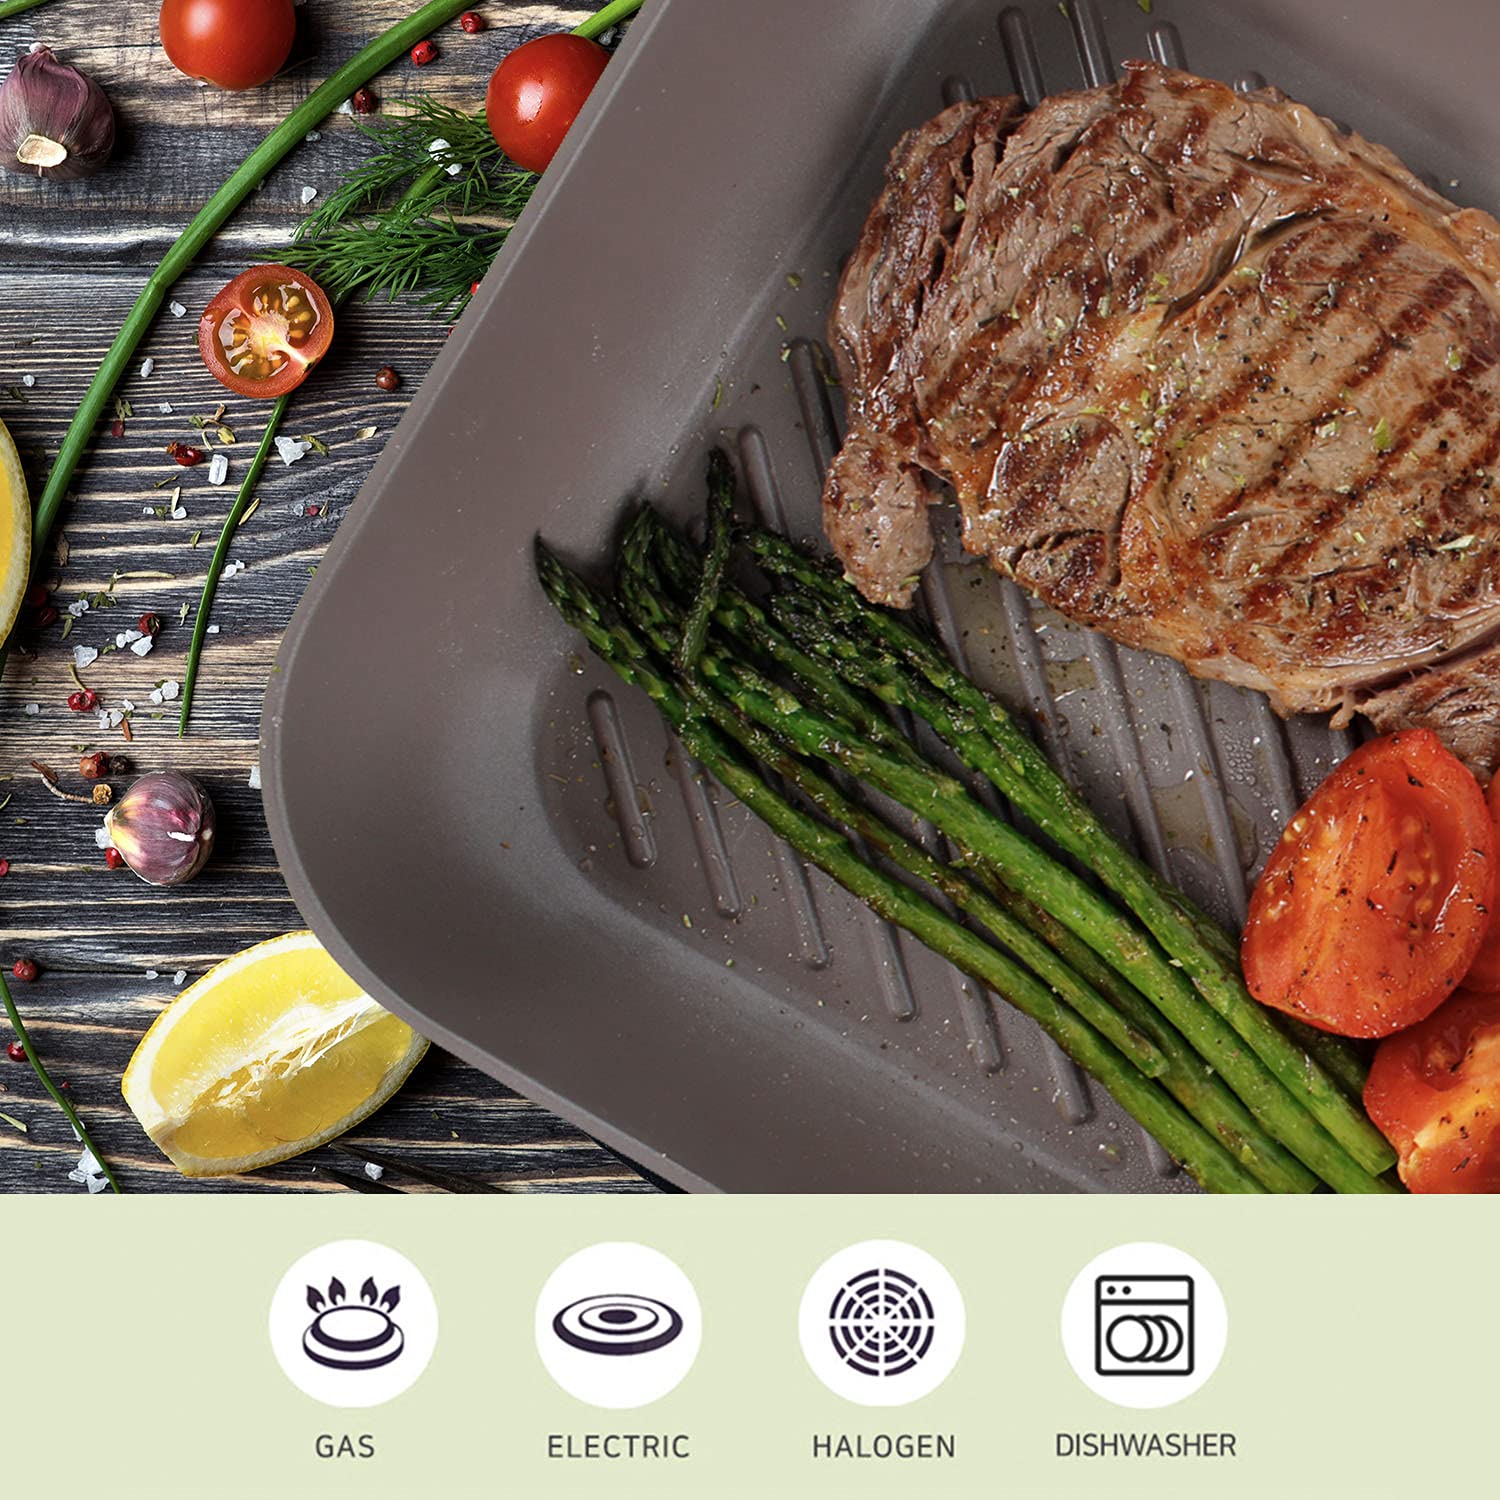 Neoflam Eela Non Stick Pan Griddle Square Stovetop Grill with Sear Ridges, PFOA Free Ecolon Ceramic Coating for Skillet, Broil, Fish Vegetables and Meat, Scratch Resistant, 11-Inch, Olive Green